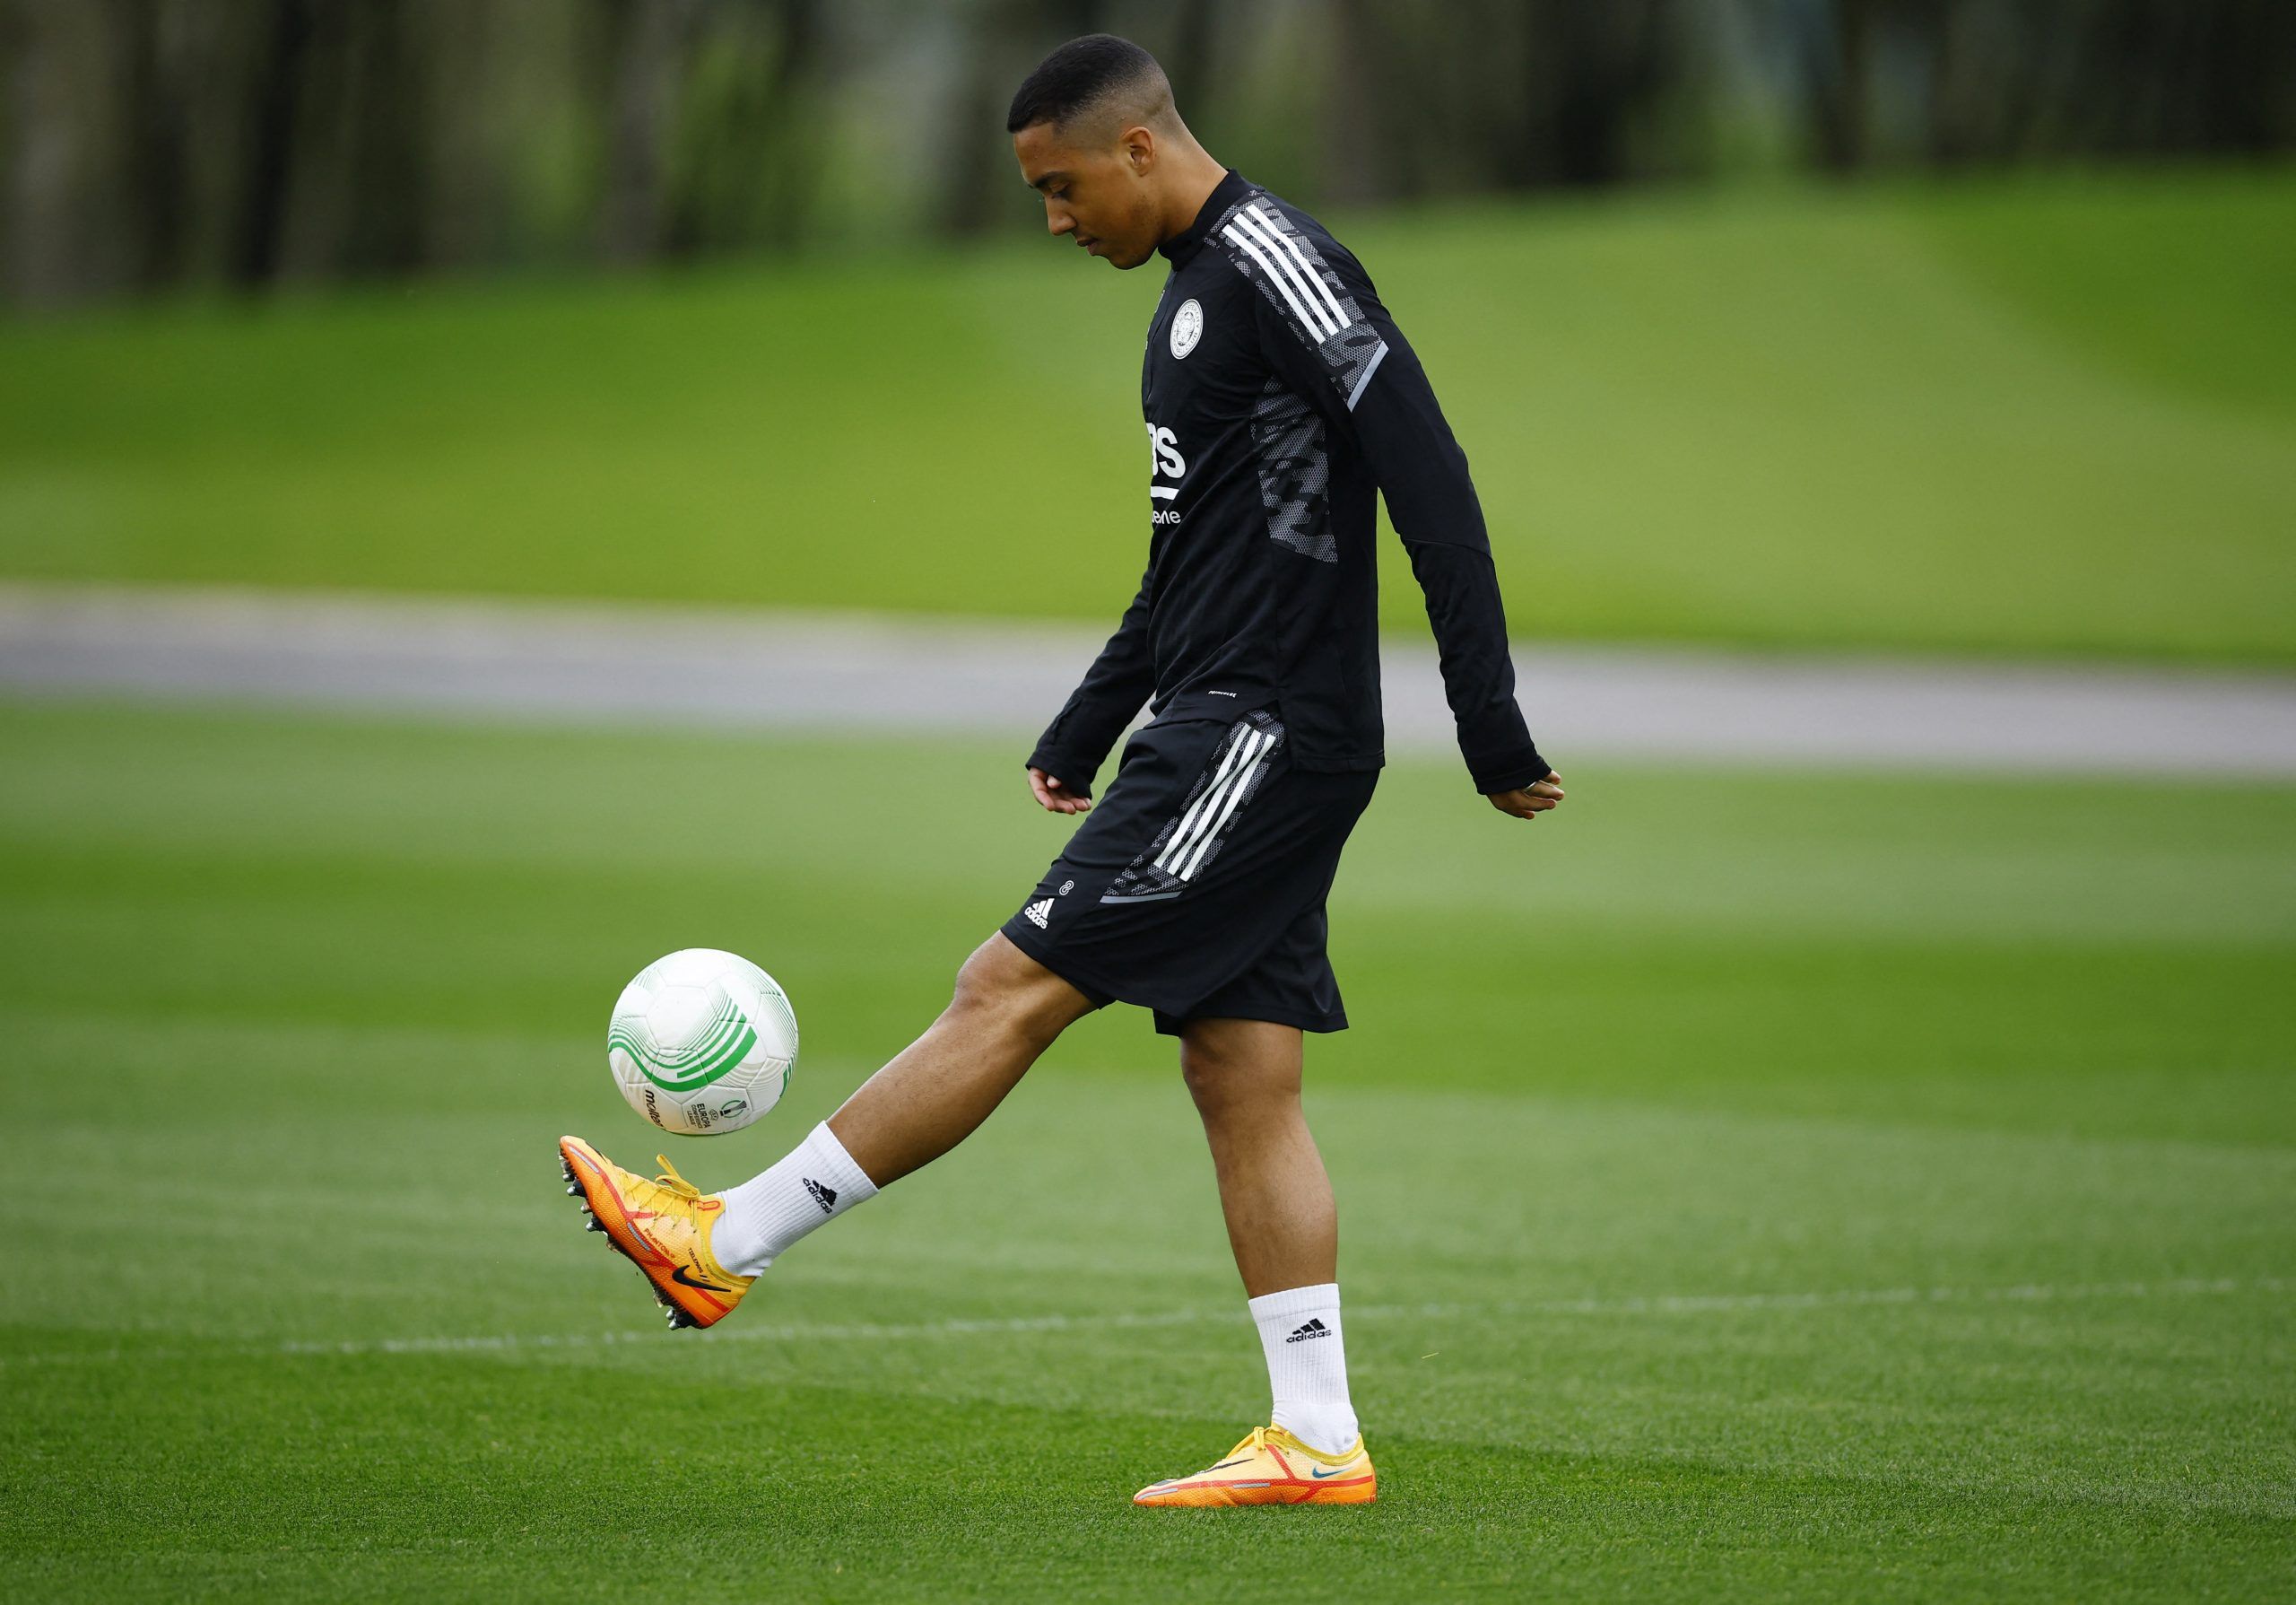 youri-tielemans-leicester-city-brendan-rodgers-arsenal-transfer-news-mikel-arteta-latest-man-city-pepSoccer Football - Europa Conference League - Leicester City Training - Leicester City Training Ground, Seagrave, Britain - May 4, 2022 Leicester City's Youri Tielemans during training Action Images via Reuters/Andrew Boyers